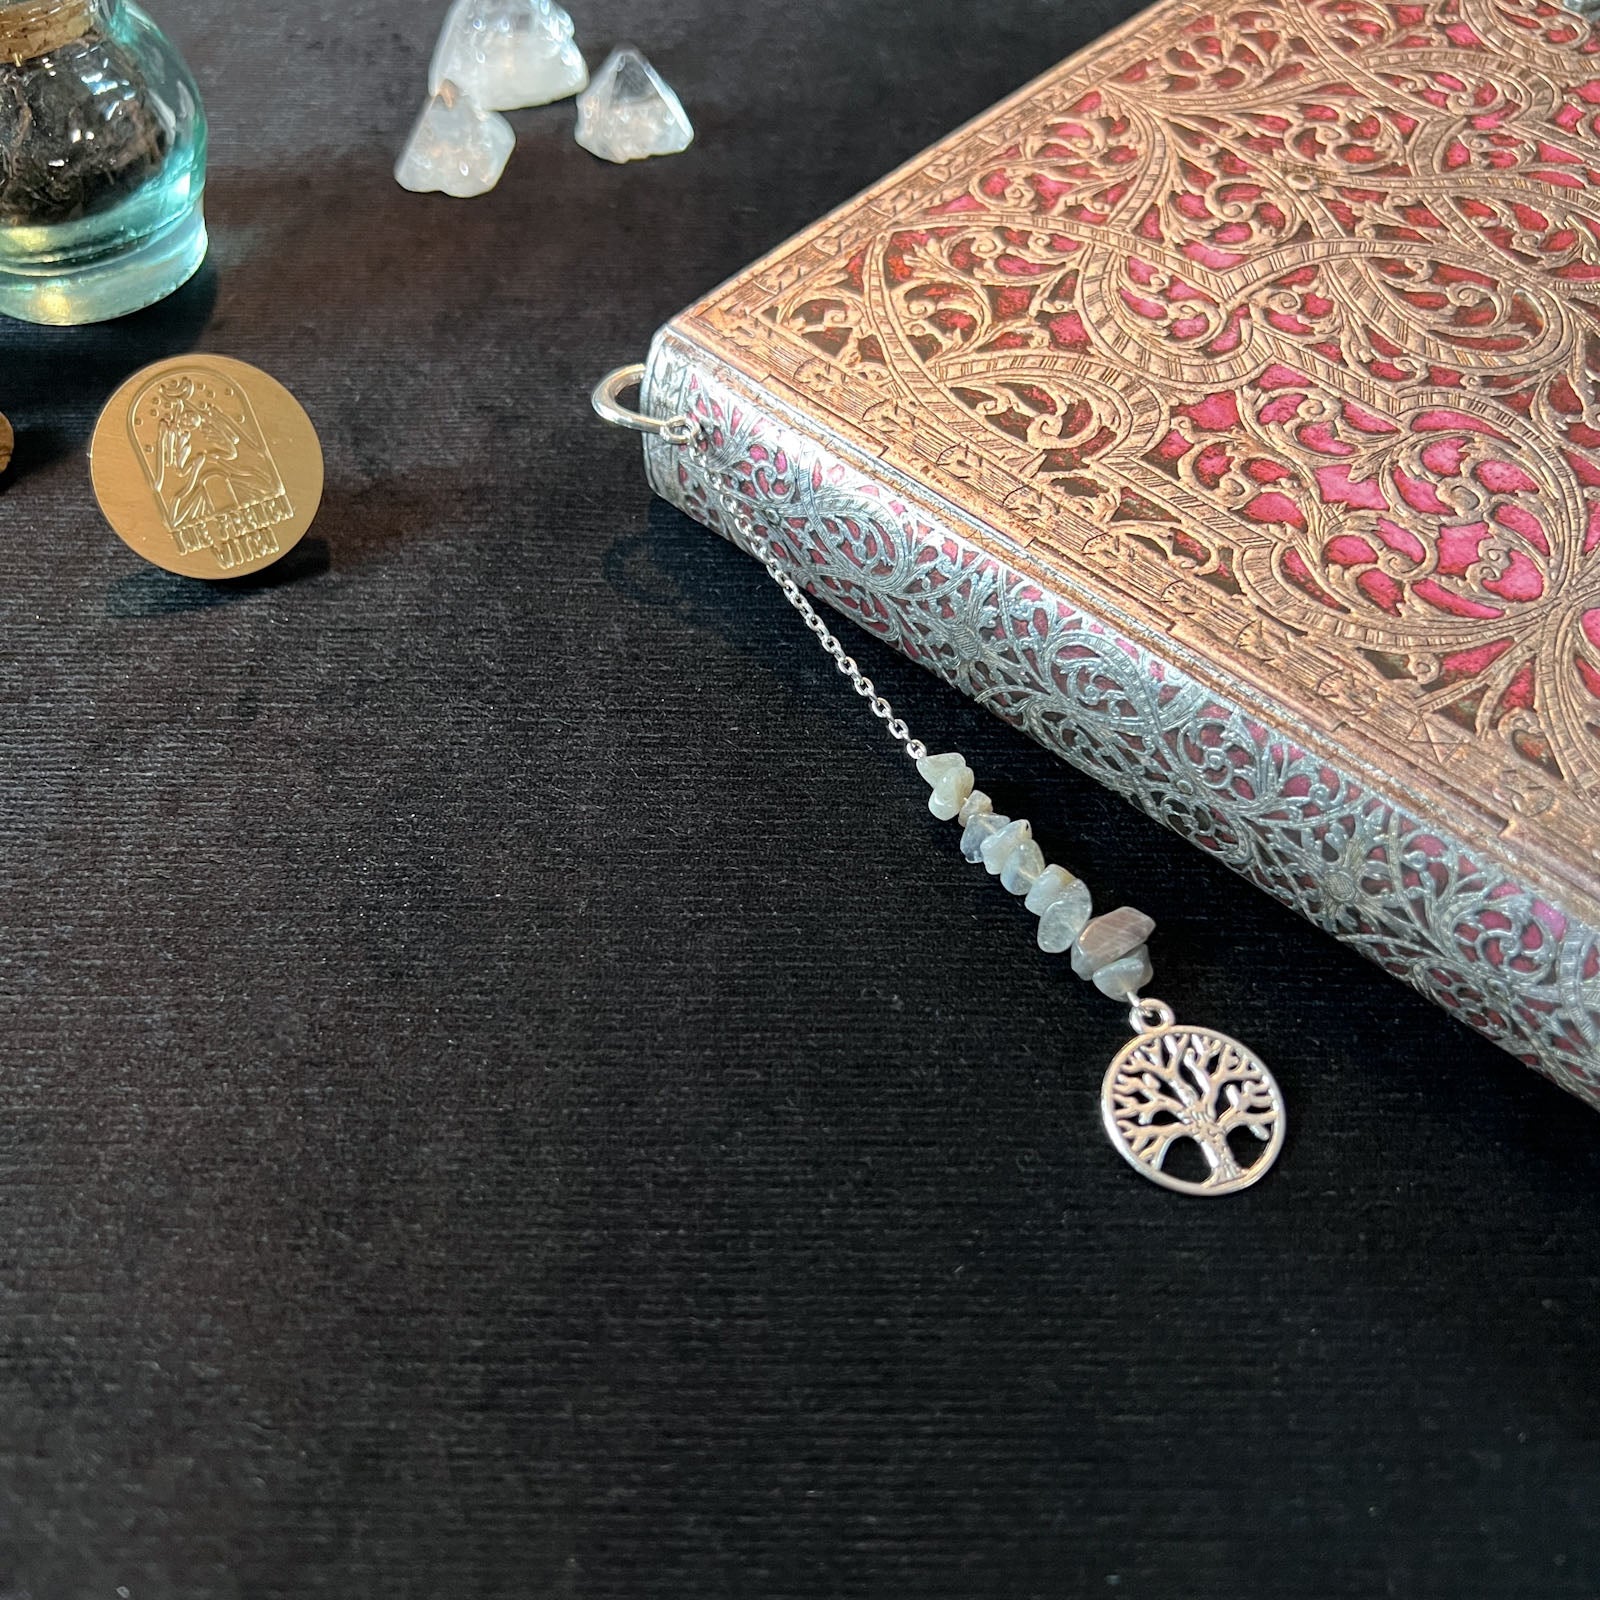 Big bookmark for your grimoire, book, journal, with gemstones and charms Baguette Magick